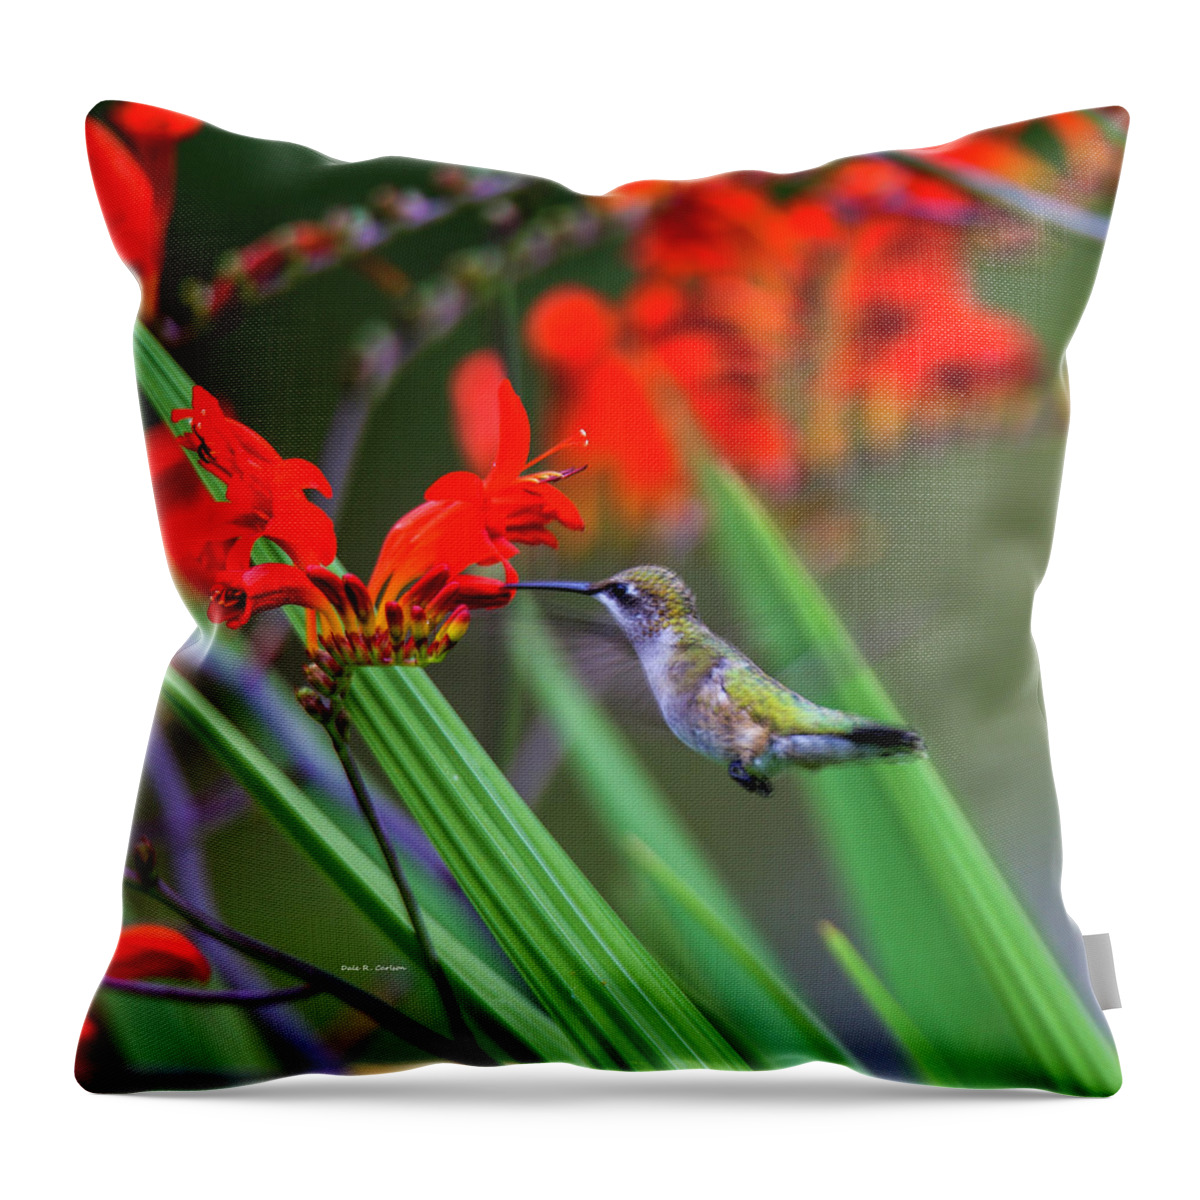 Hummingbird Throw Pillow featuring the photograph Hummer Lunch by Dale R Carlson